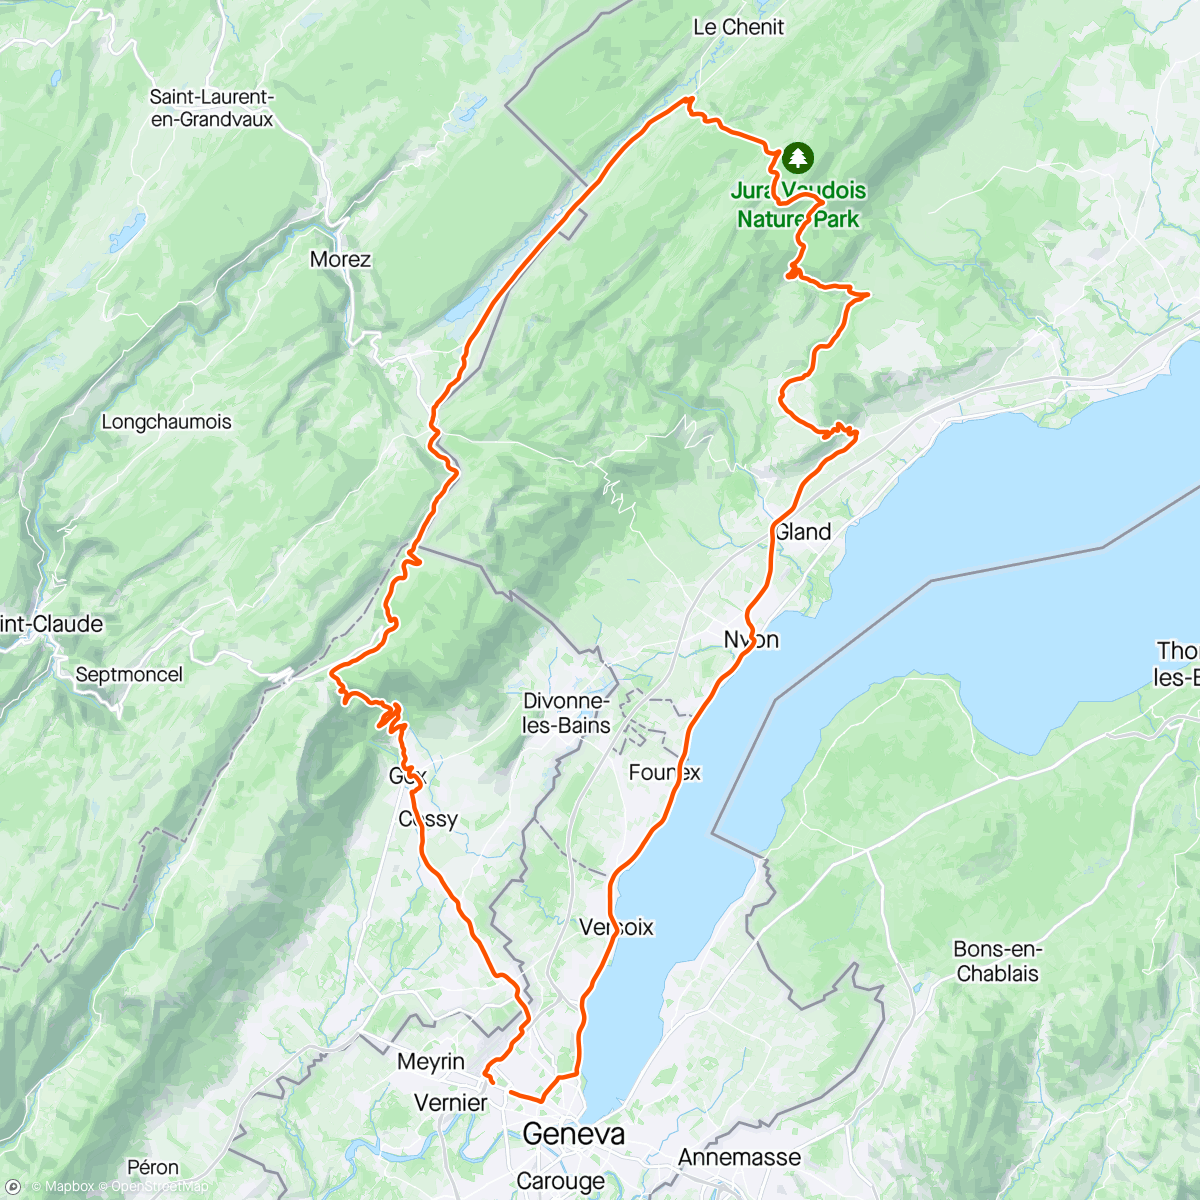 Map of the activity, Merci LeCerCle. 

🚴🏻🚴🏻🚴‍♀️🚴🏻🚴‍♀️🚴🏻🥵🔥⛰️🥵🔥